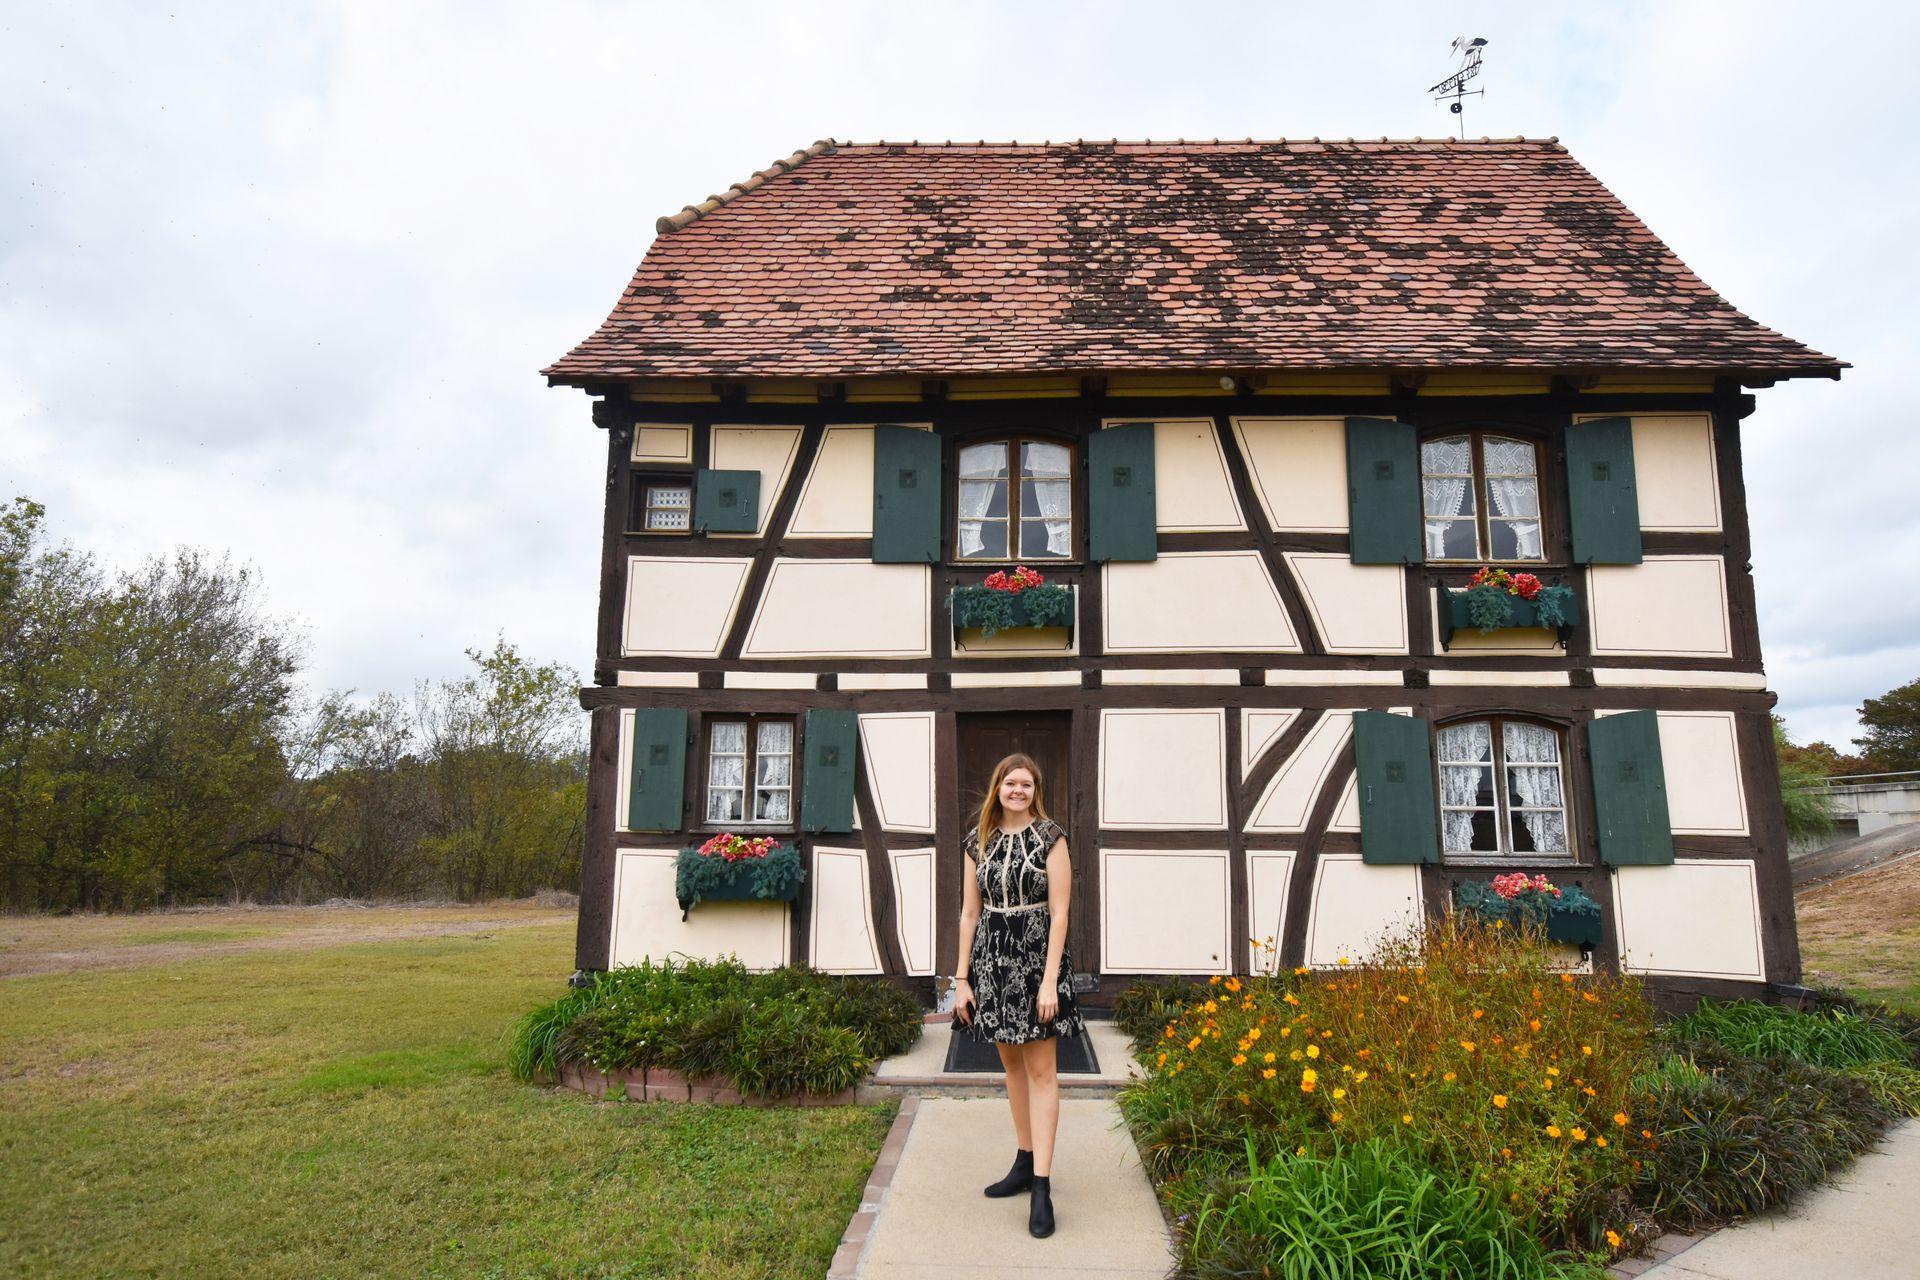 Lydia standing in front of the Alsatian Steinbach House in Castroville